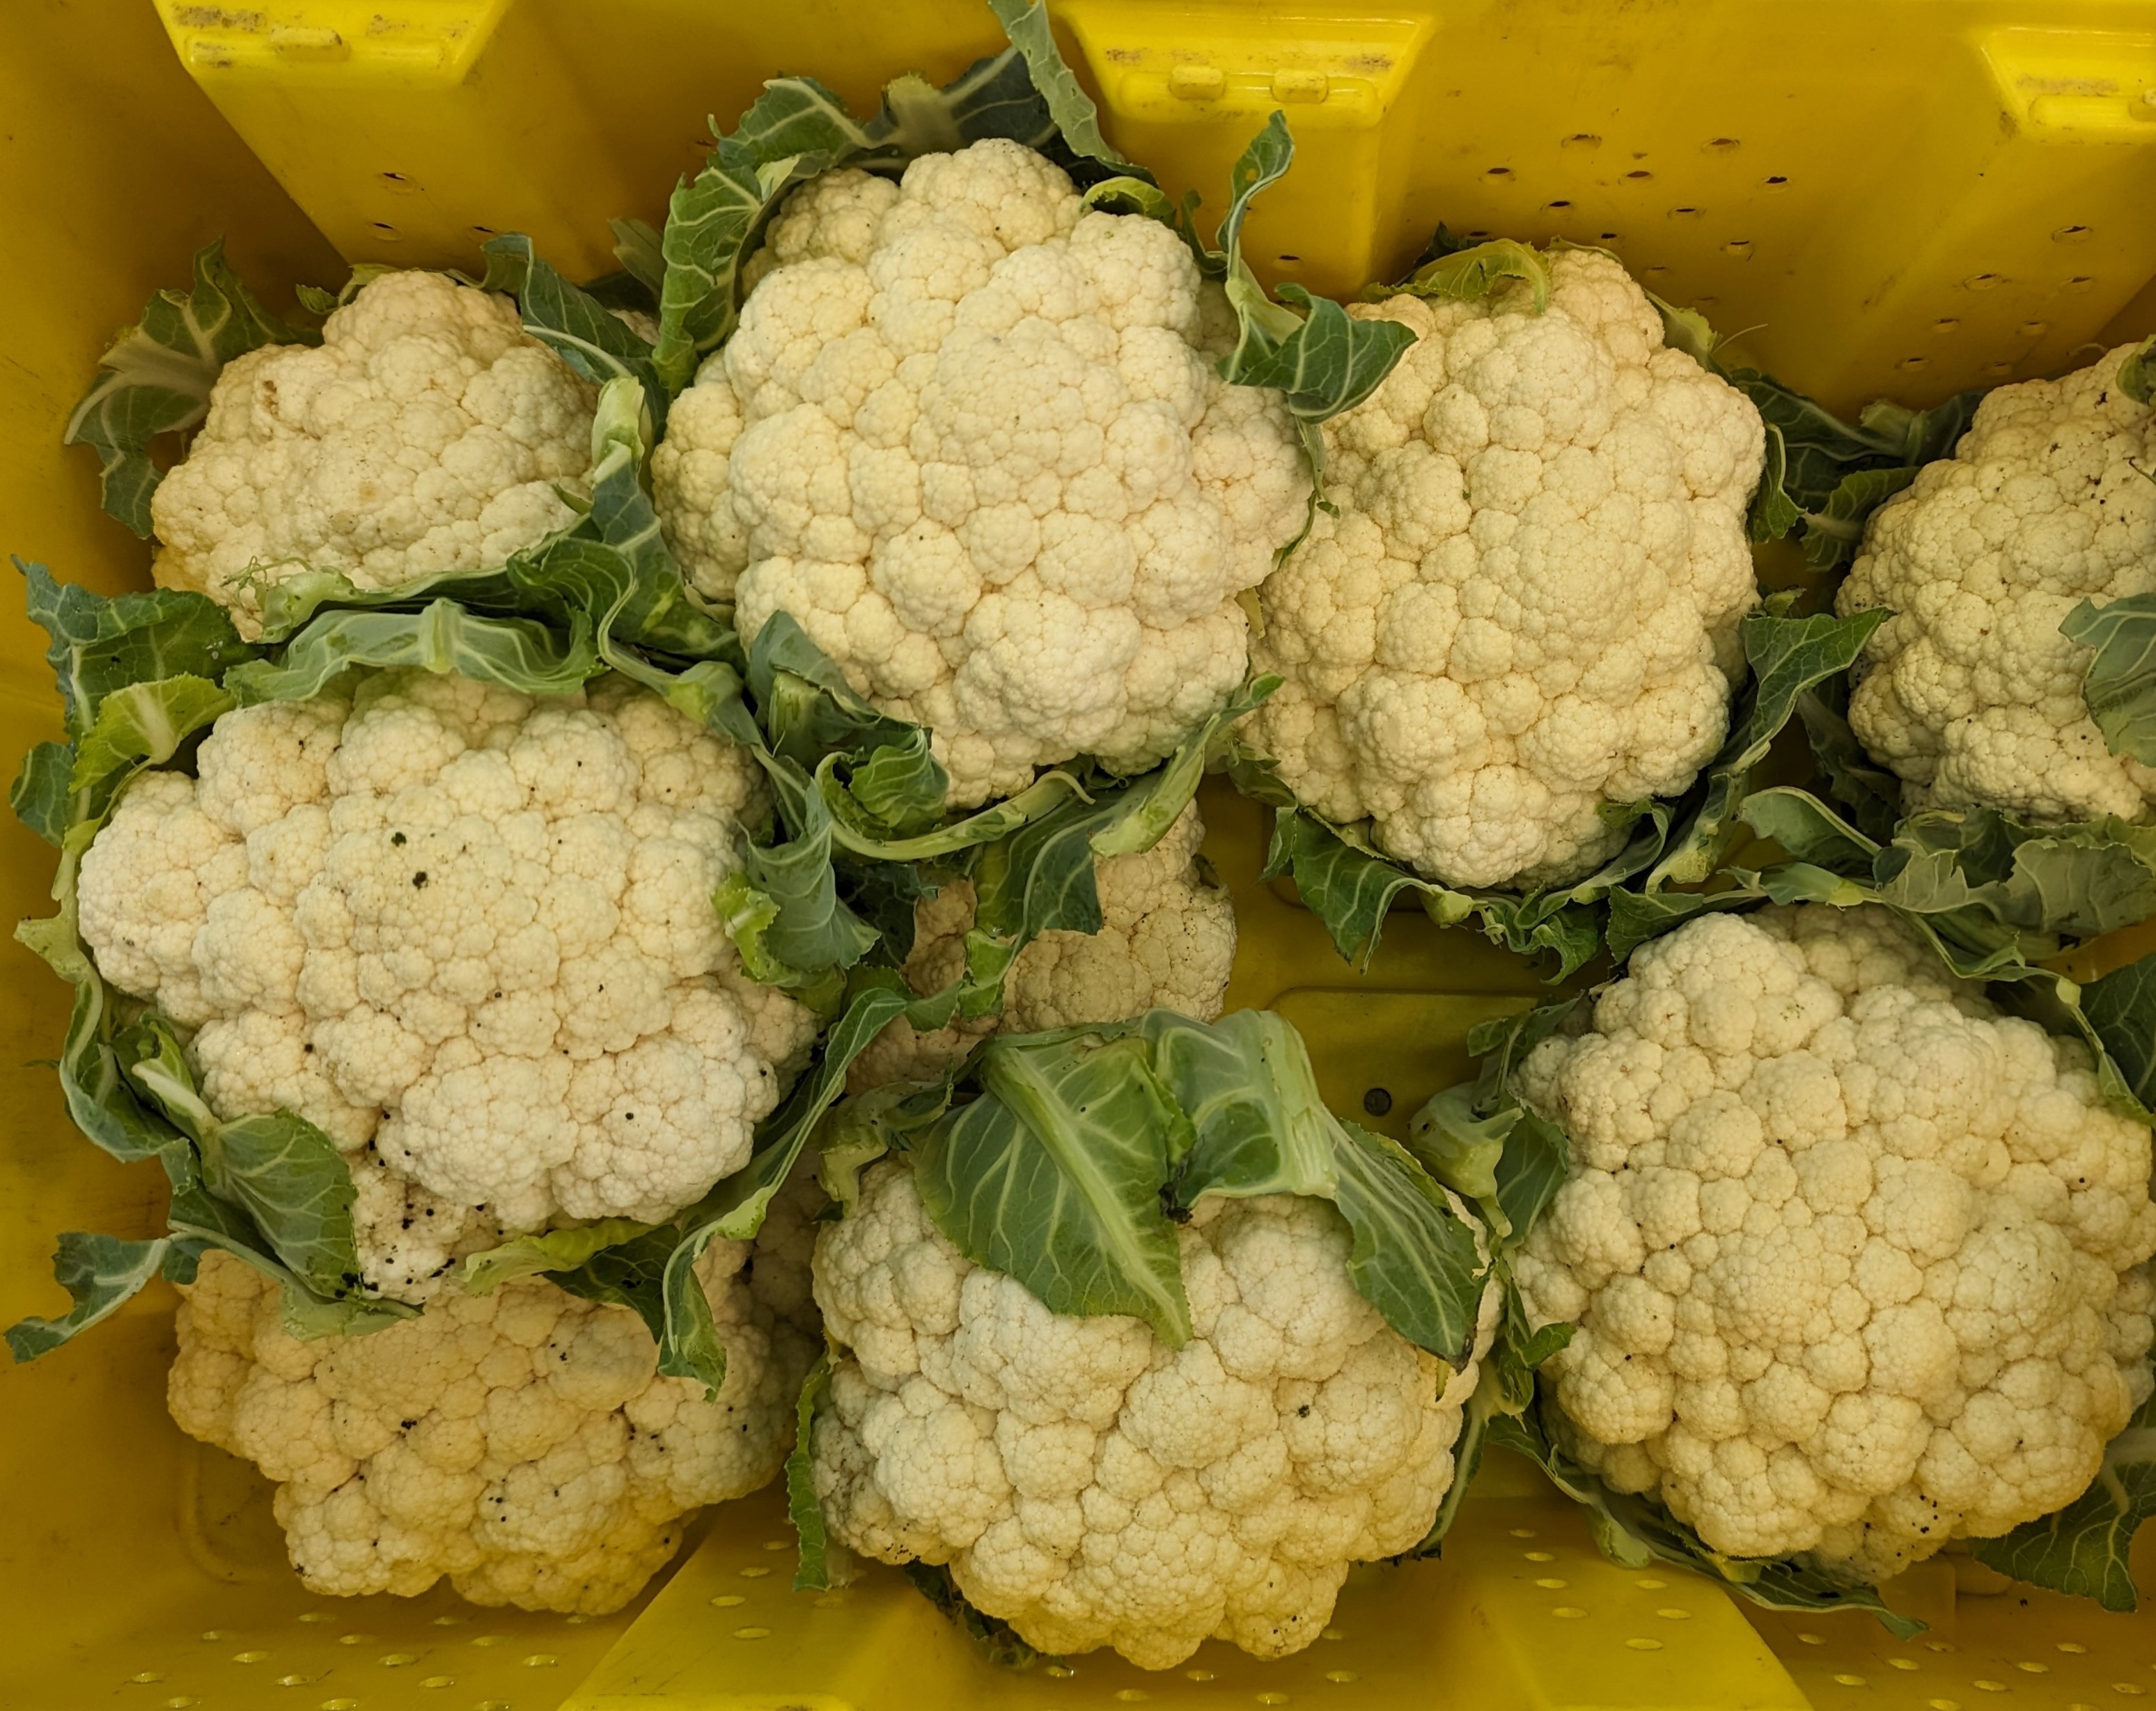 A decent crop of summer cauliflower, but for the frass on 40% of it. Photo by Ben Phillips, MSU Extension.